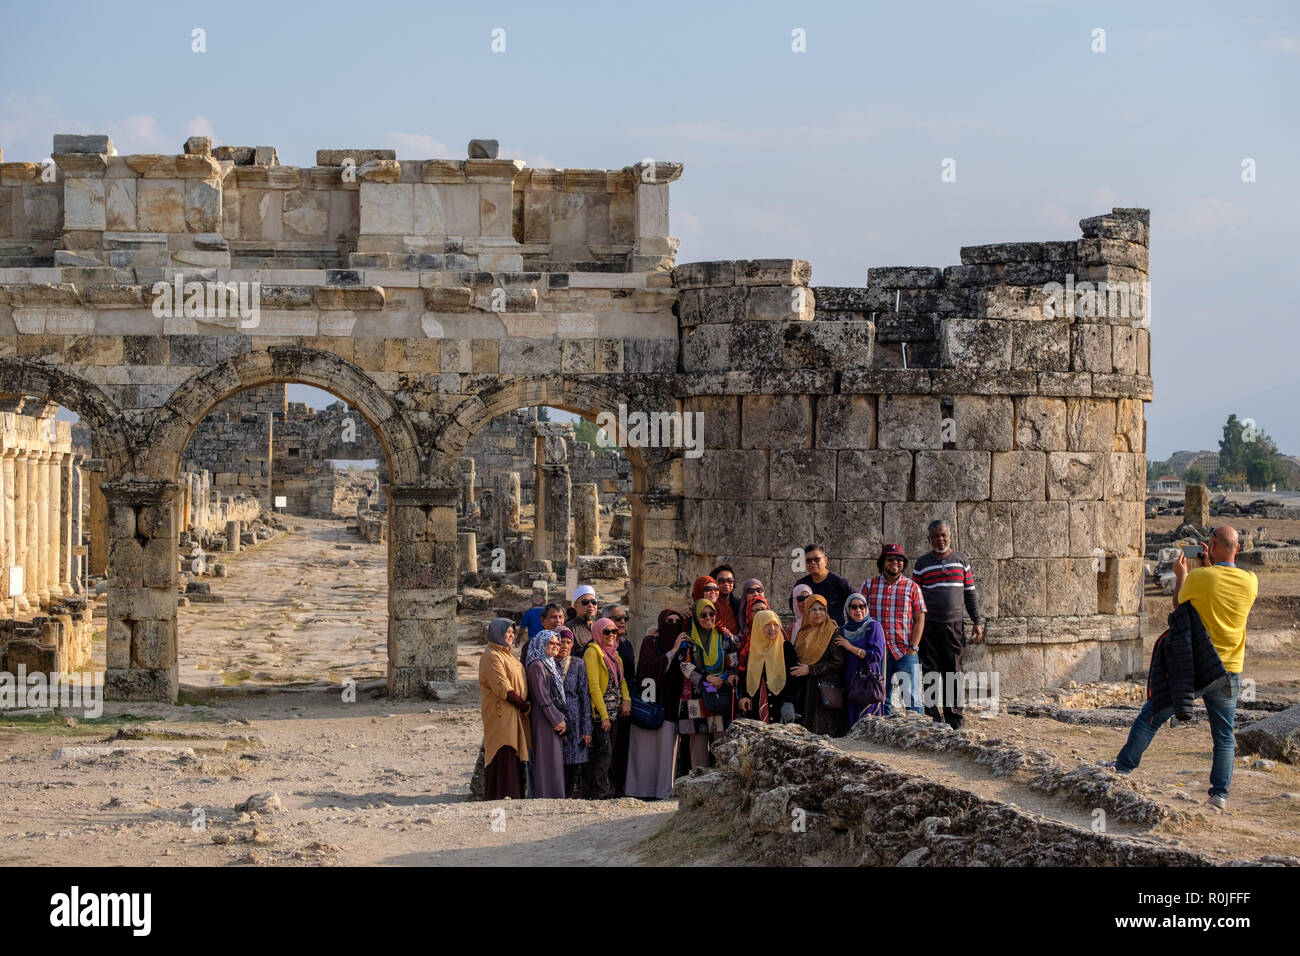 Muslim tour group taking photos in front of the ruins of the Frontinus Gate in the ancient Roman city of Hierapolis, Turkey Stock Photo